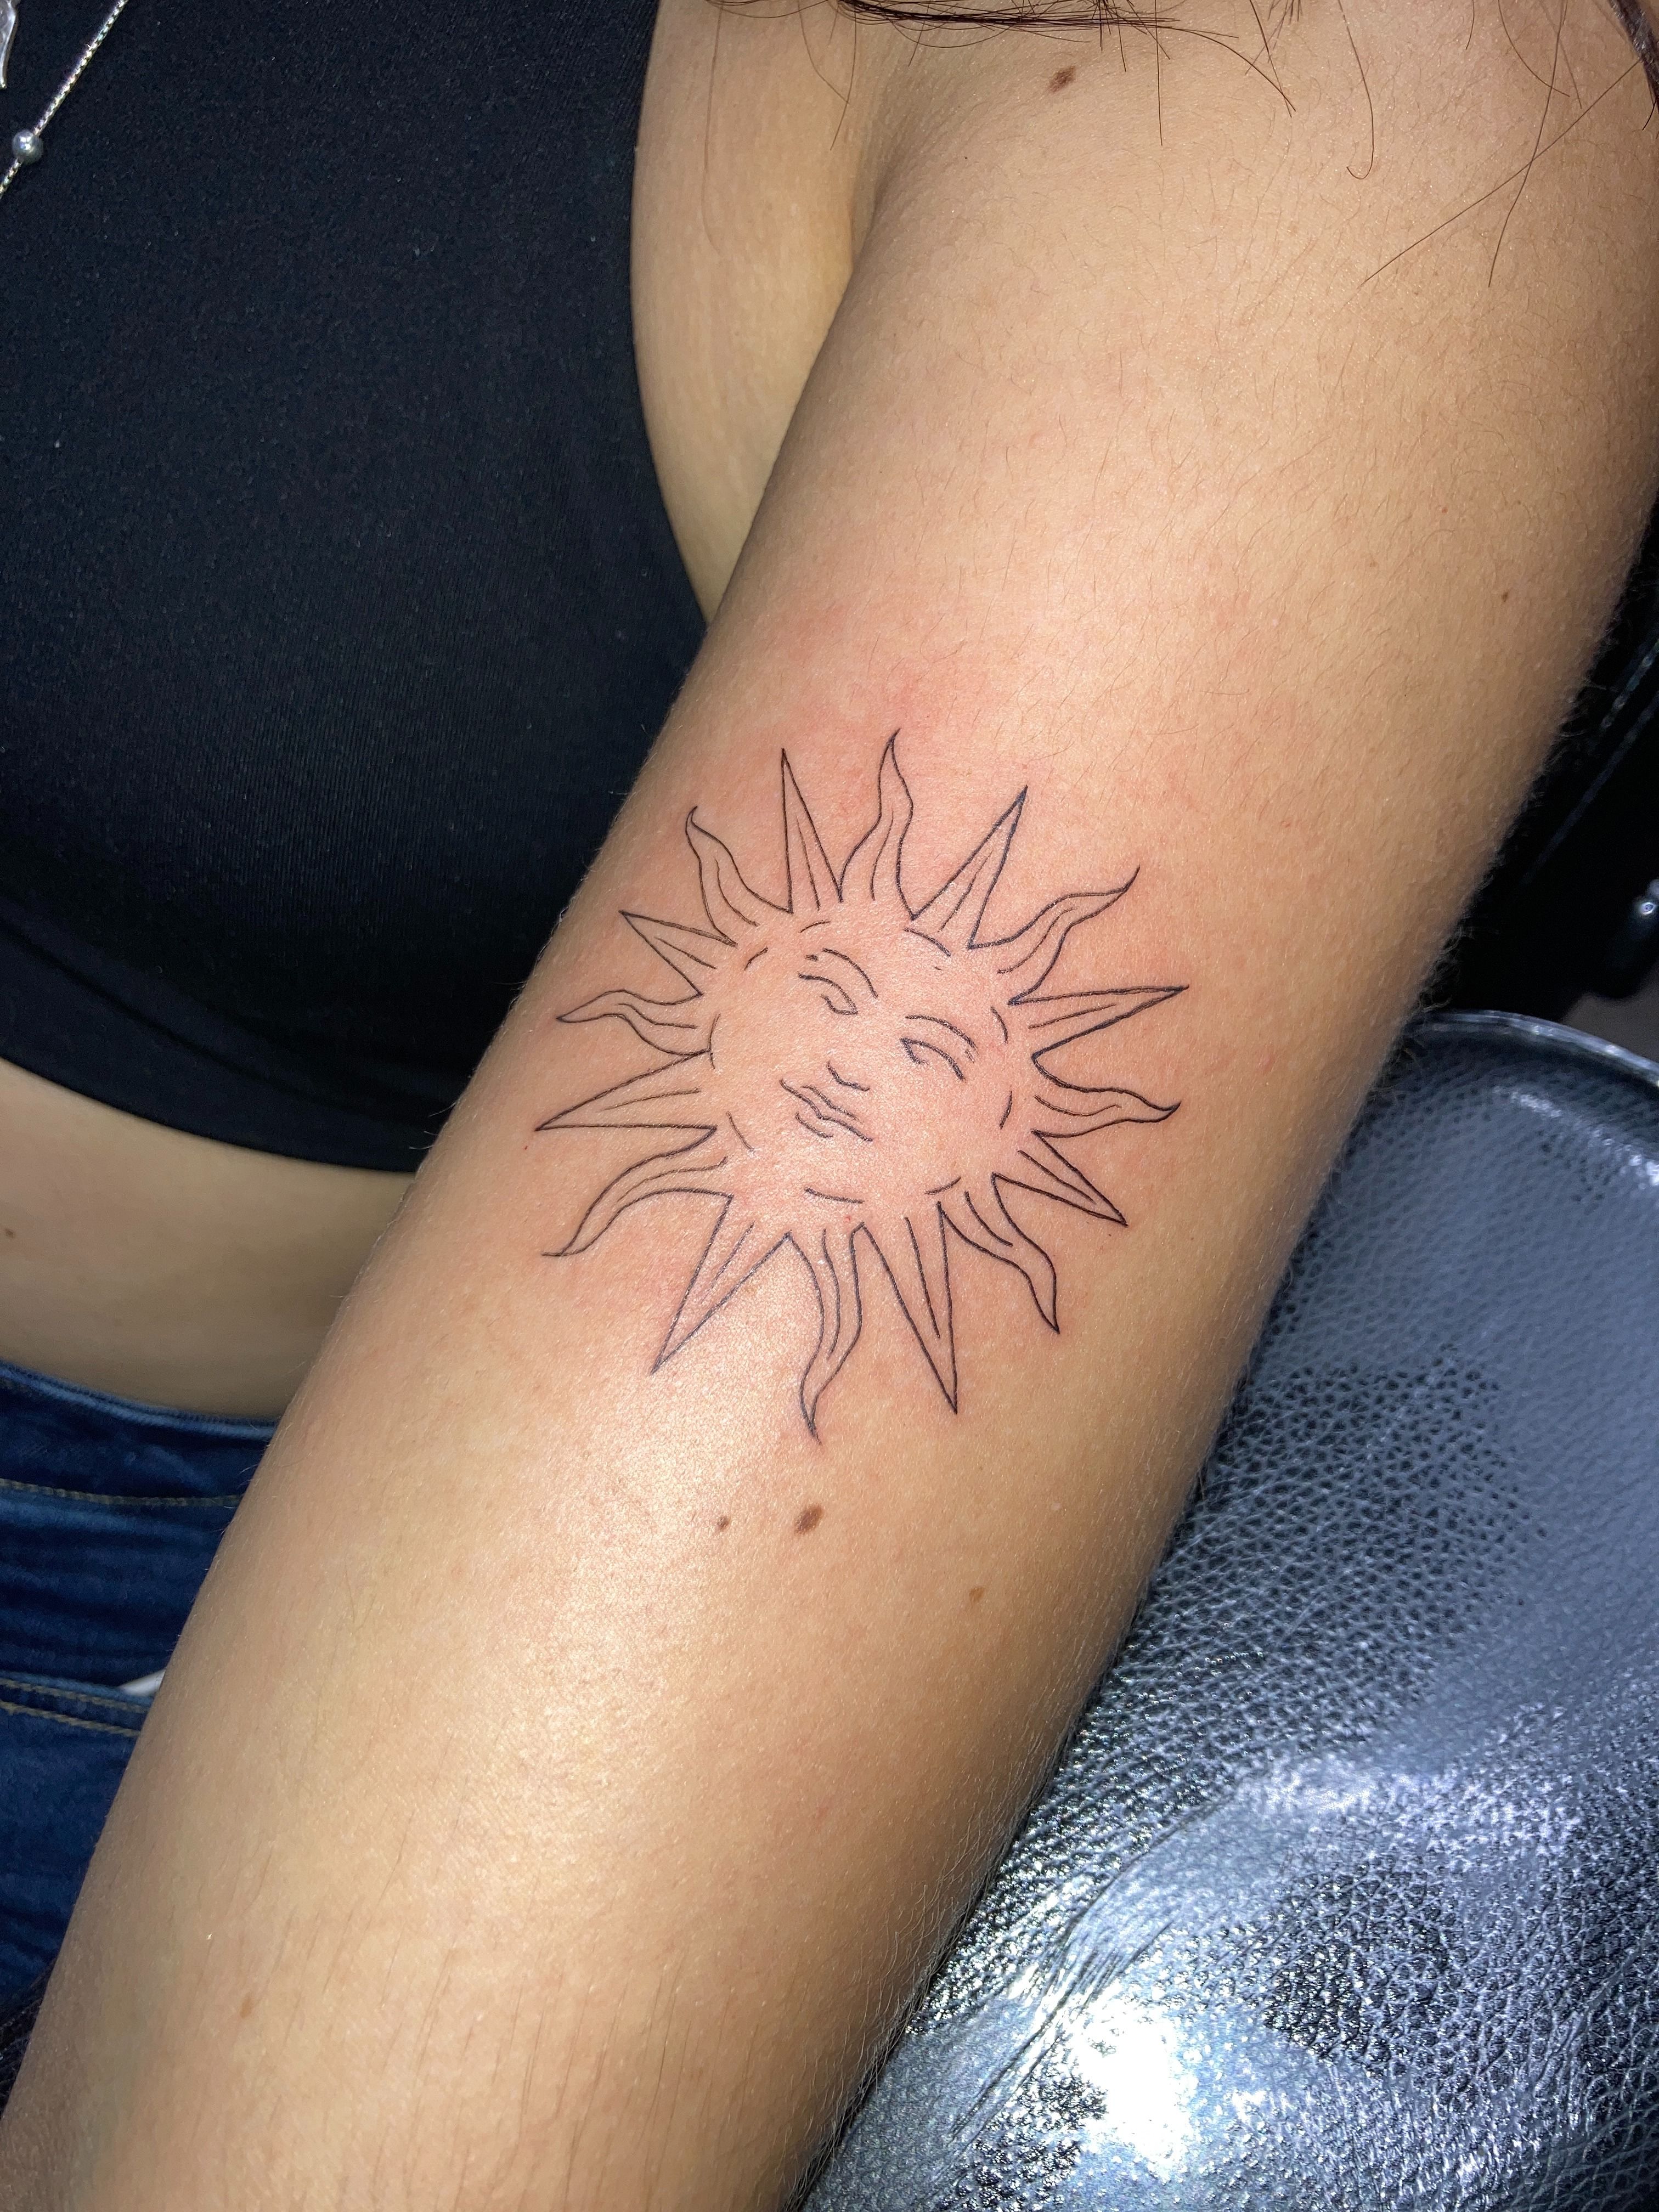 These Sun Tattoos Are Here To Brighten Up Your Day – Fortunate Goods